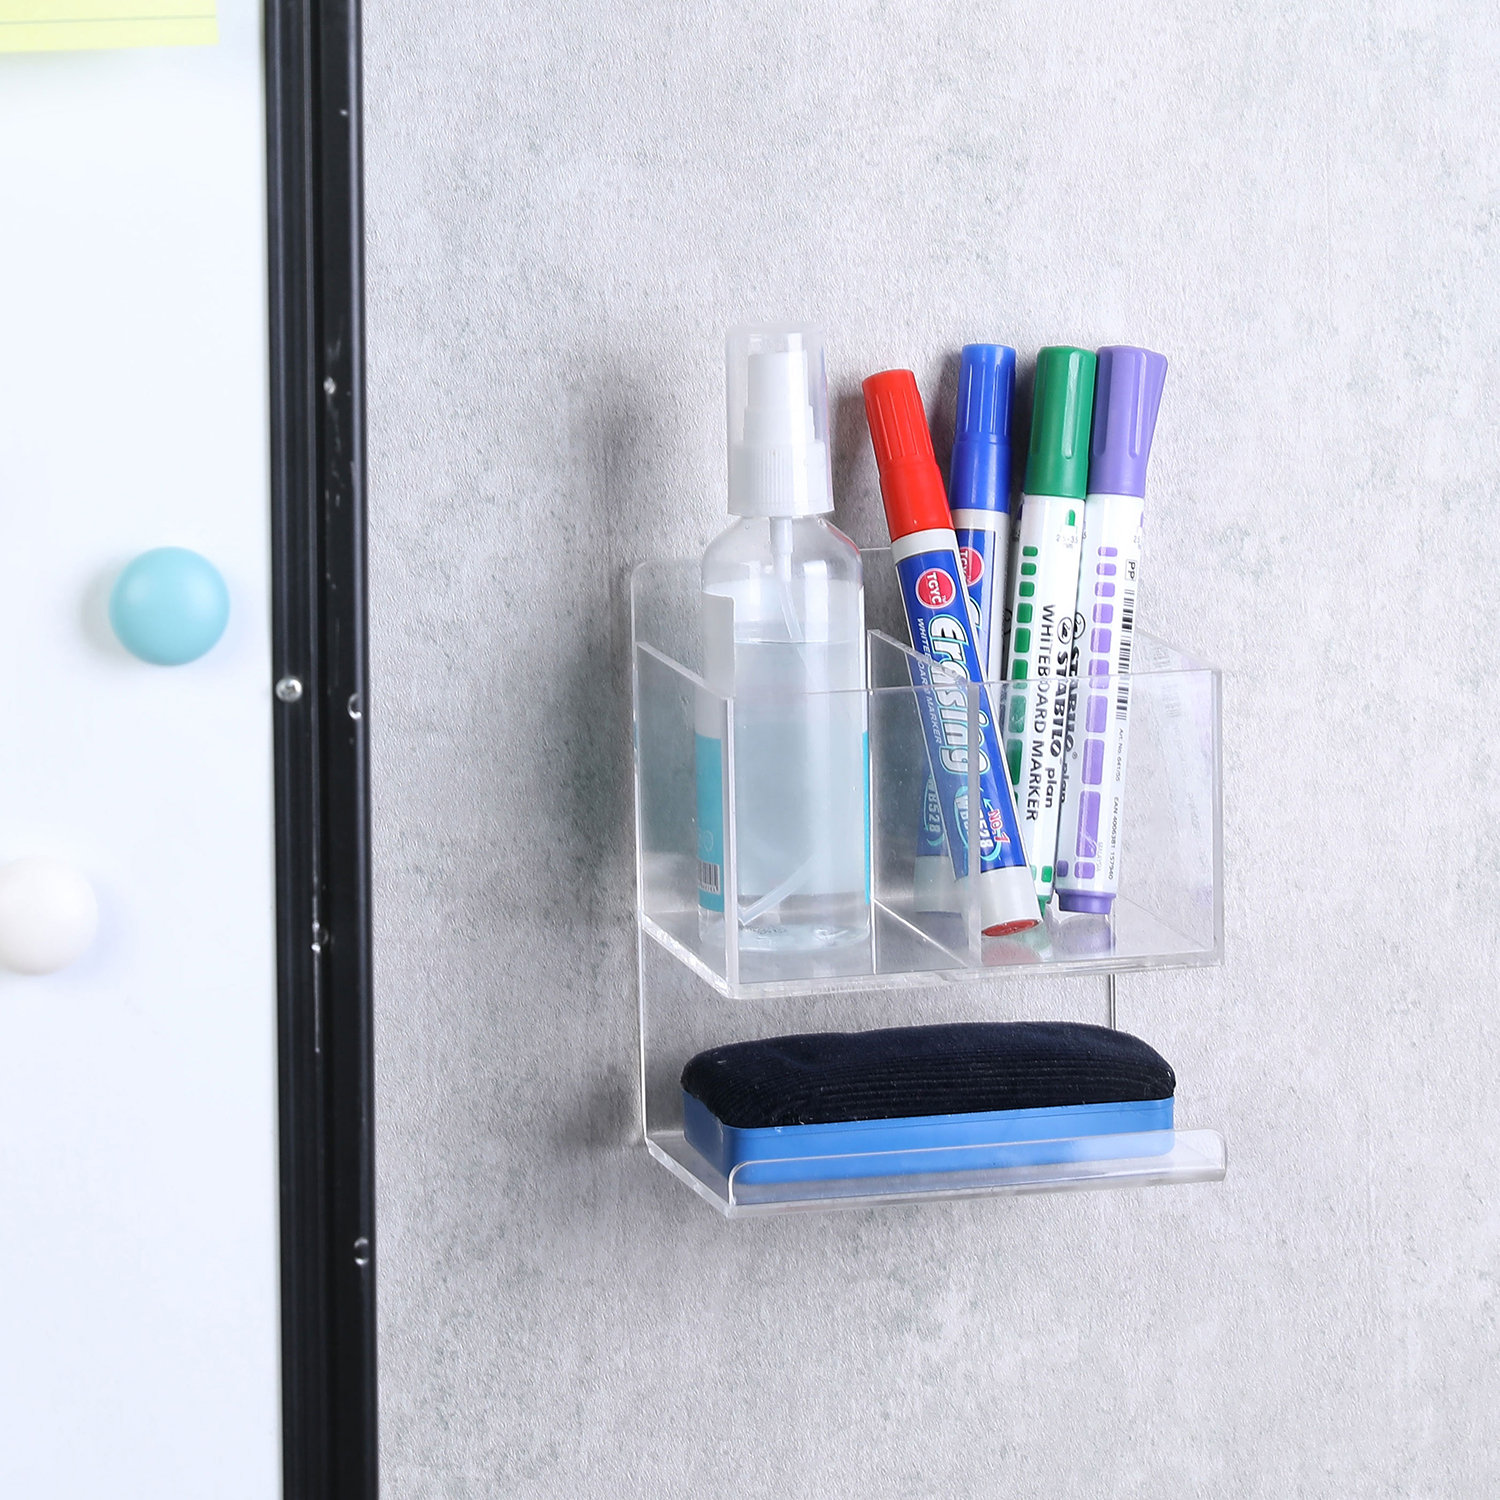 Pencil Holder - Self-Adhesive Wall Mount Pen Cup,Marker Pot,Writing Utensil  Storage Organizer for Fridge,Locker,Whiteboard,Home and Office - White 